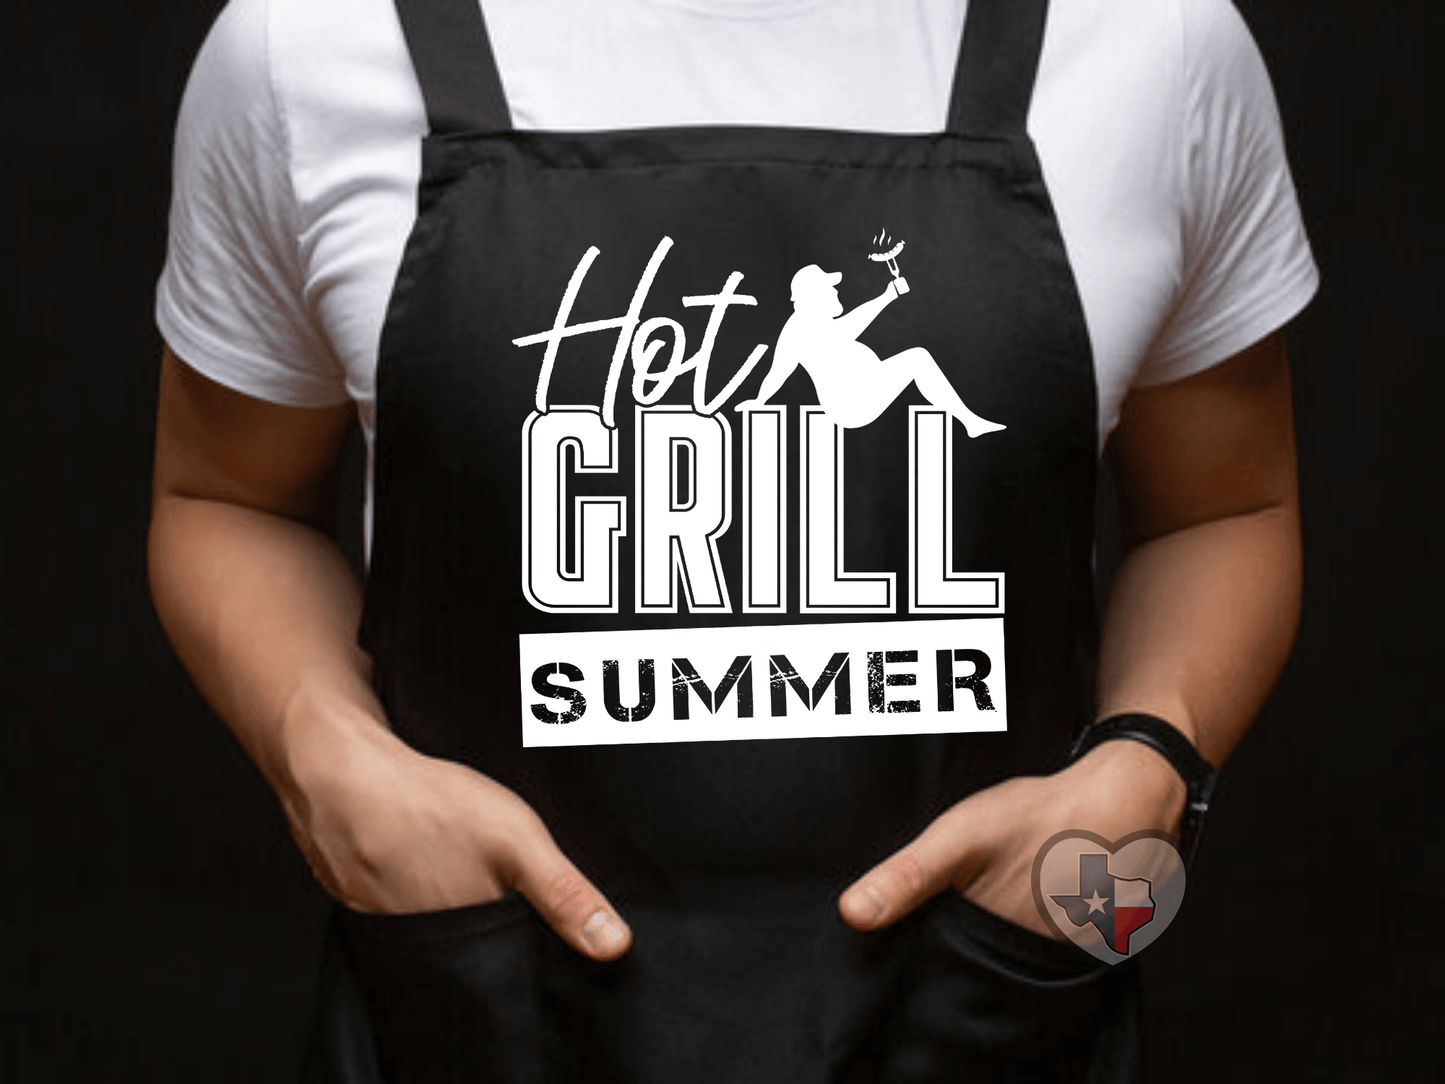 Hot Grill Summer - Texas Transfers and Designs